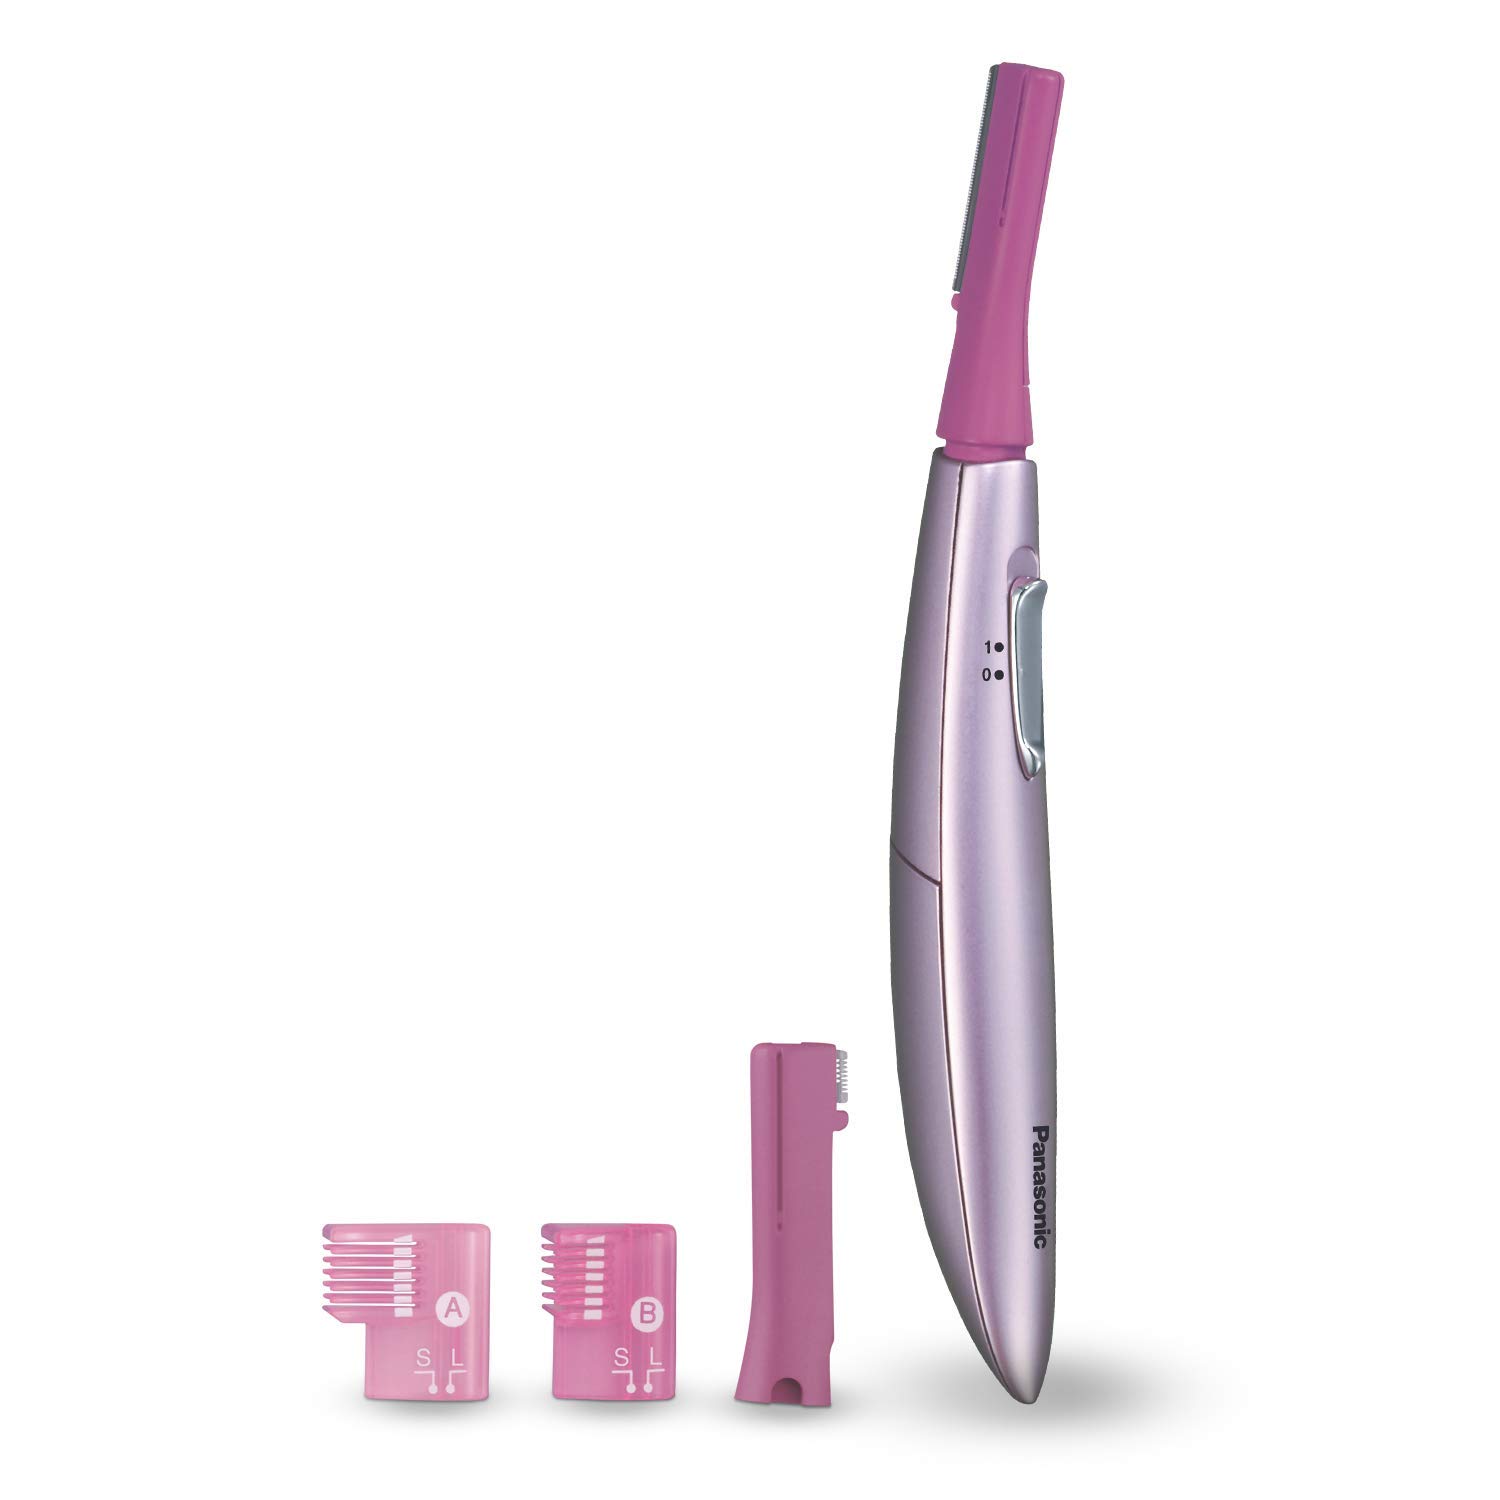  1. Panasonic Eyebrow and Facial Hair Trimmer for Women 